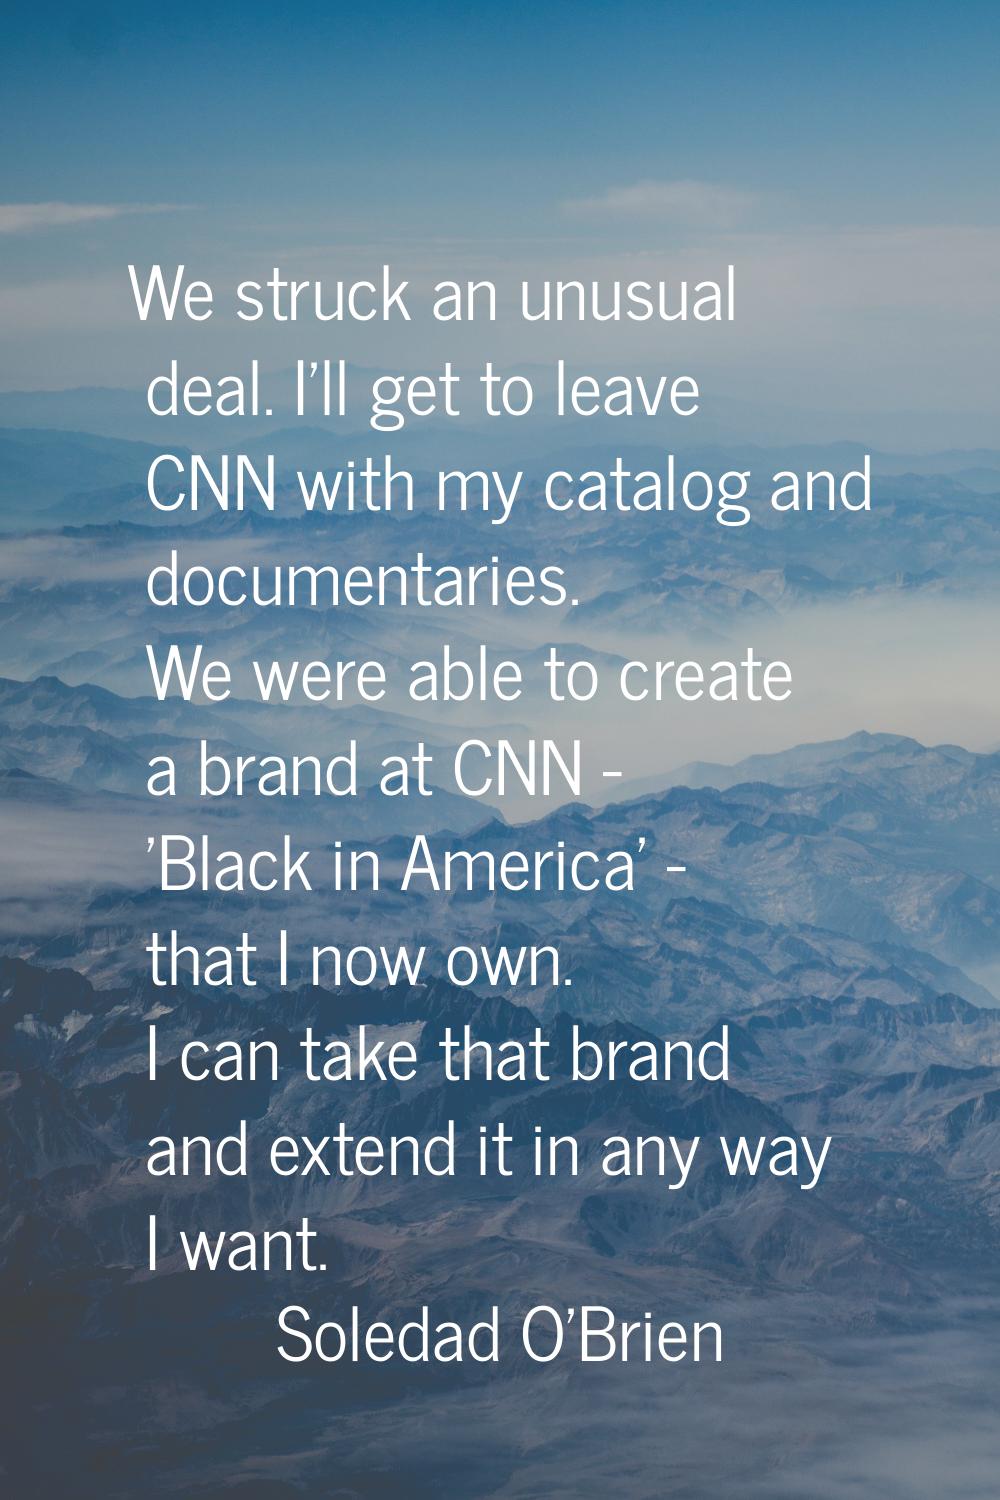 We struck an unusual deal. I'll get to leave CNN with my catalog and documentaries. We were able to